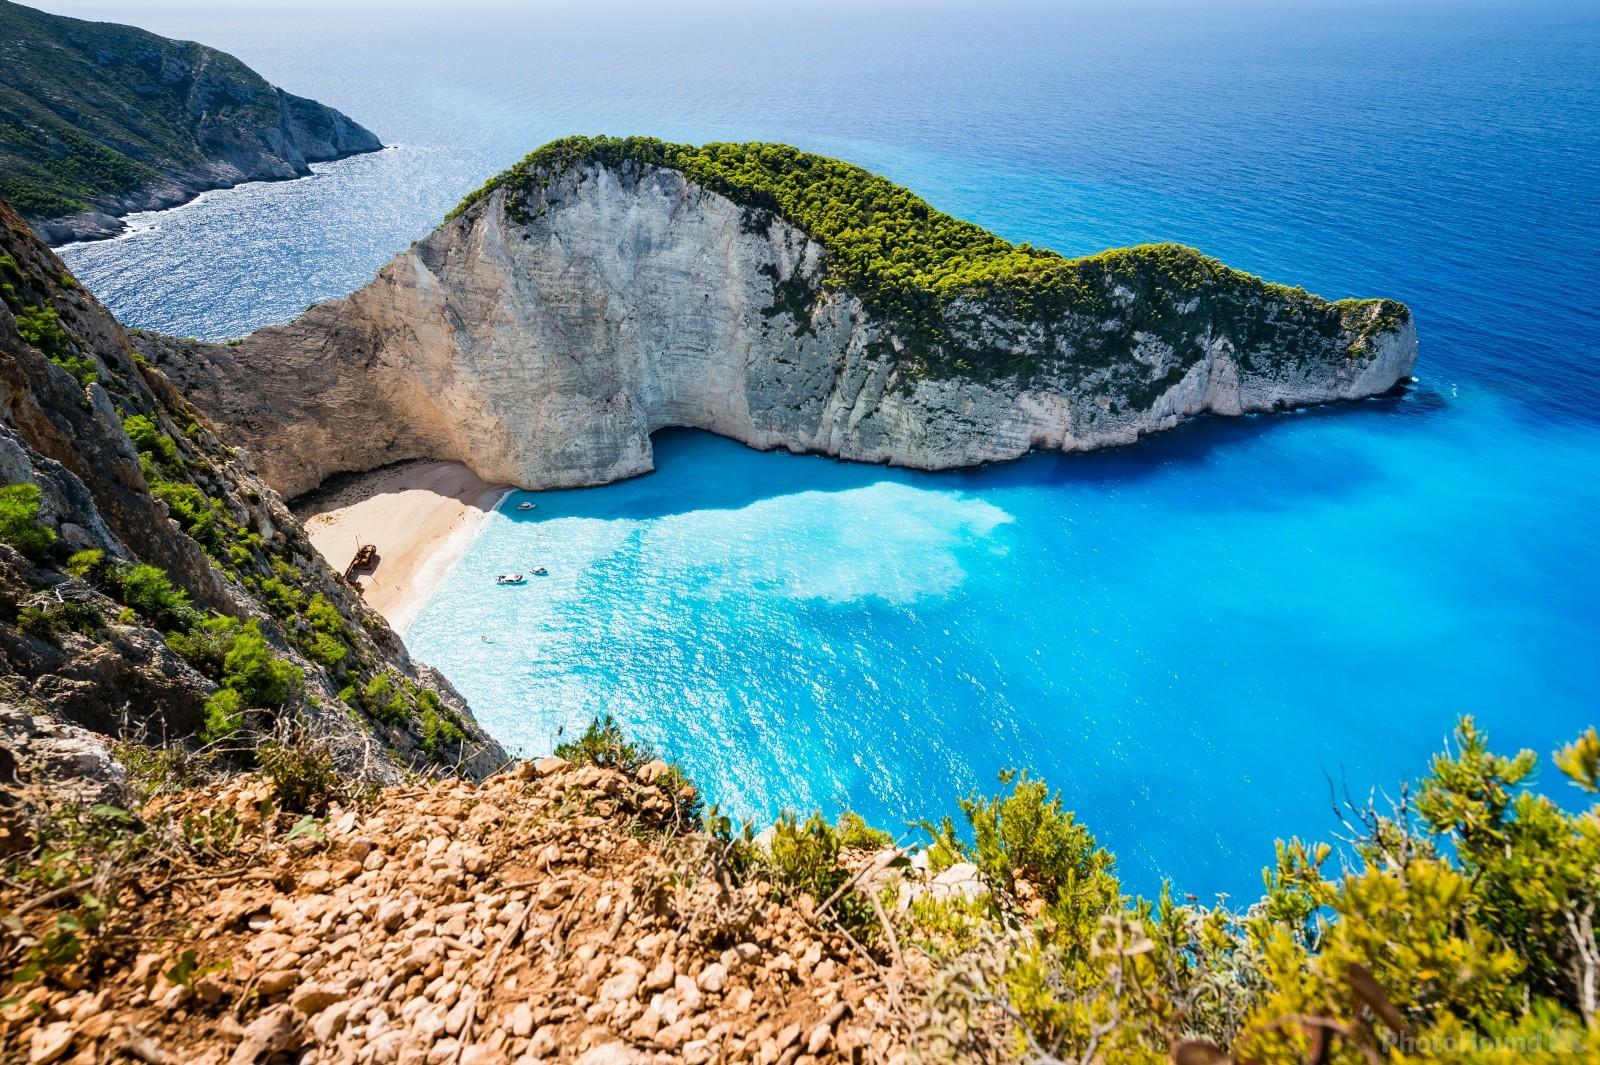 Image of Navagio Beach View by VOJTa Herout